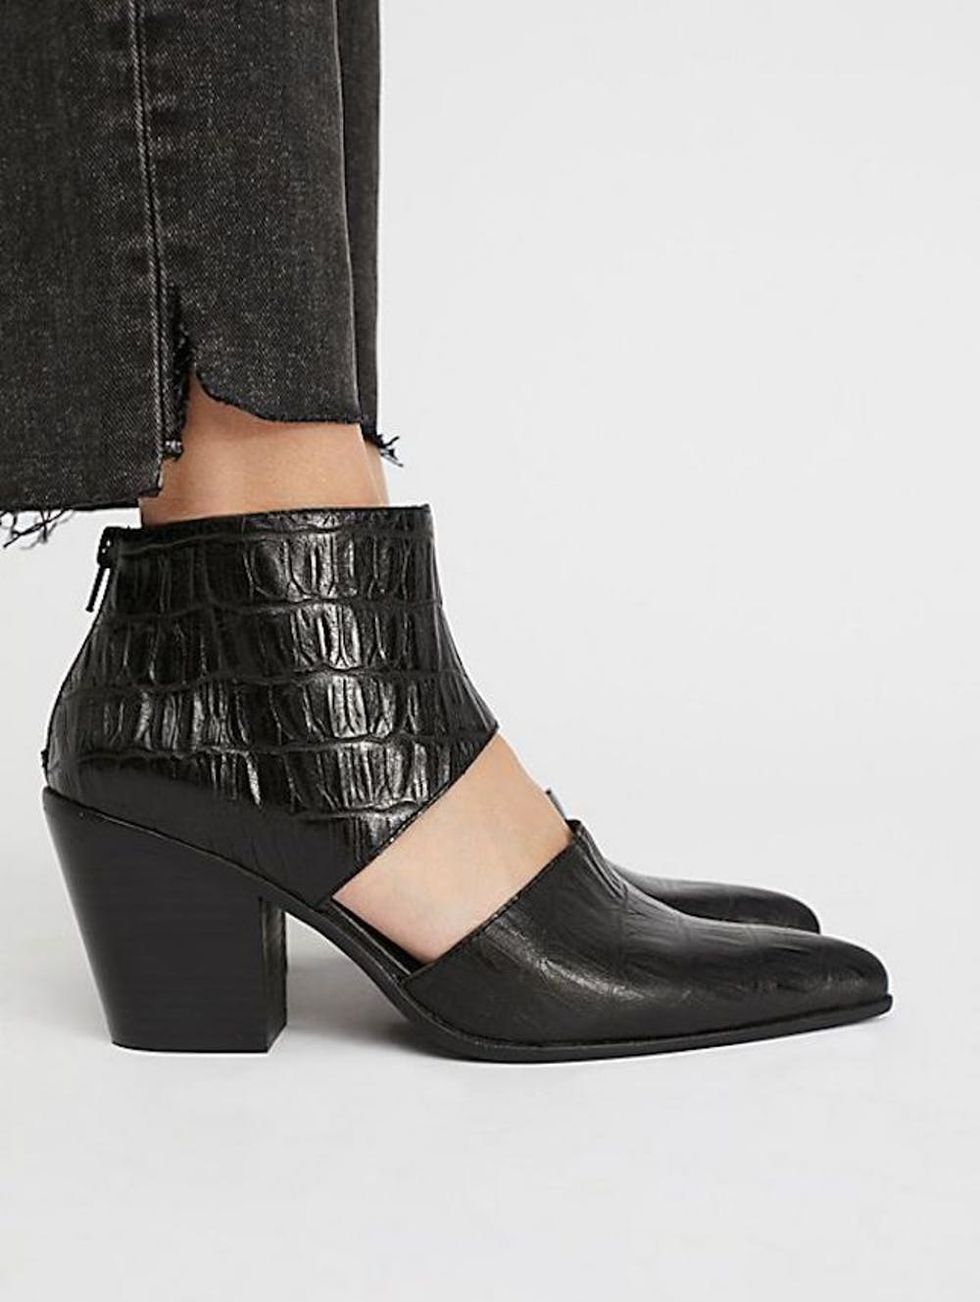 7 Boots You’ll Actually Wear This Spring - Brit + Co